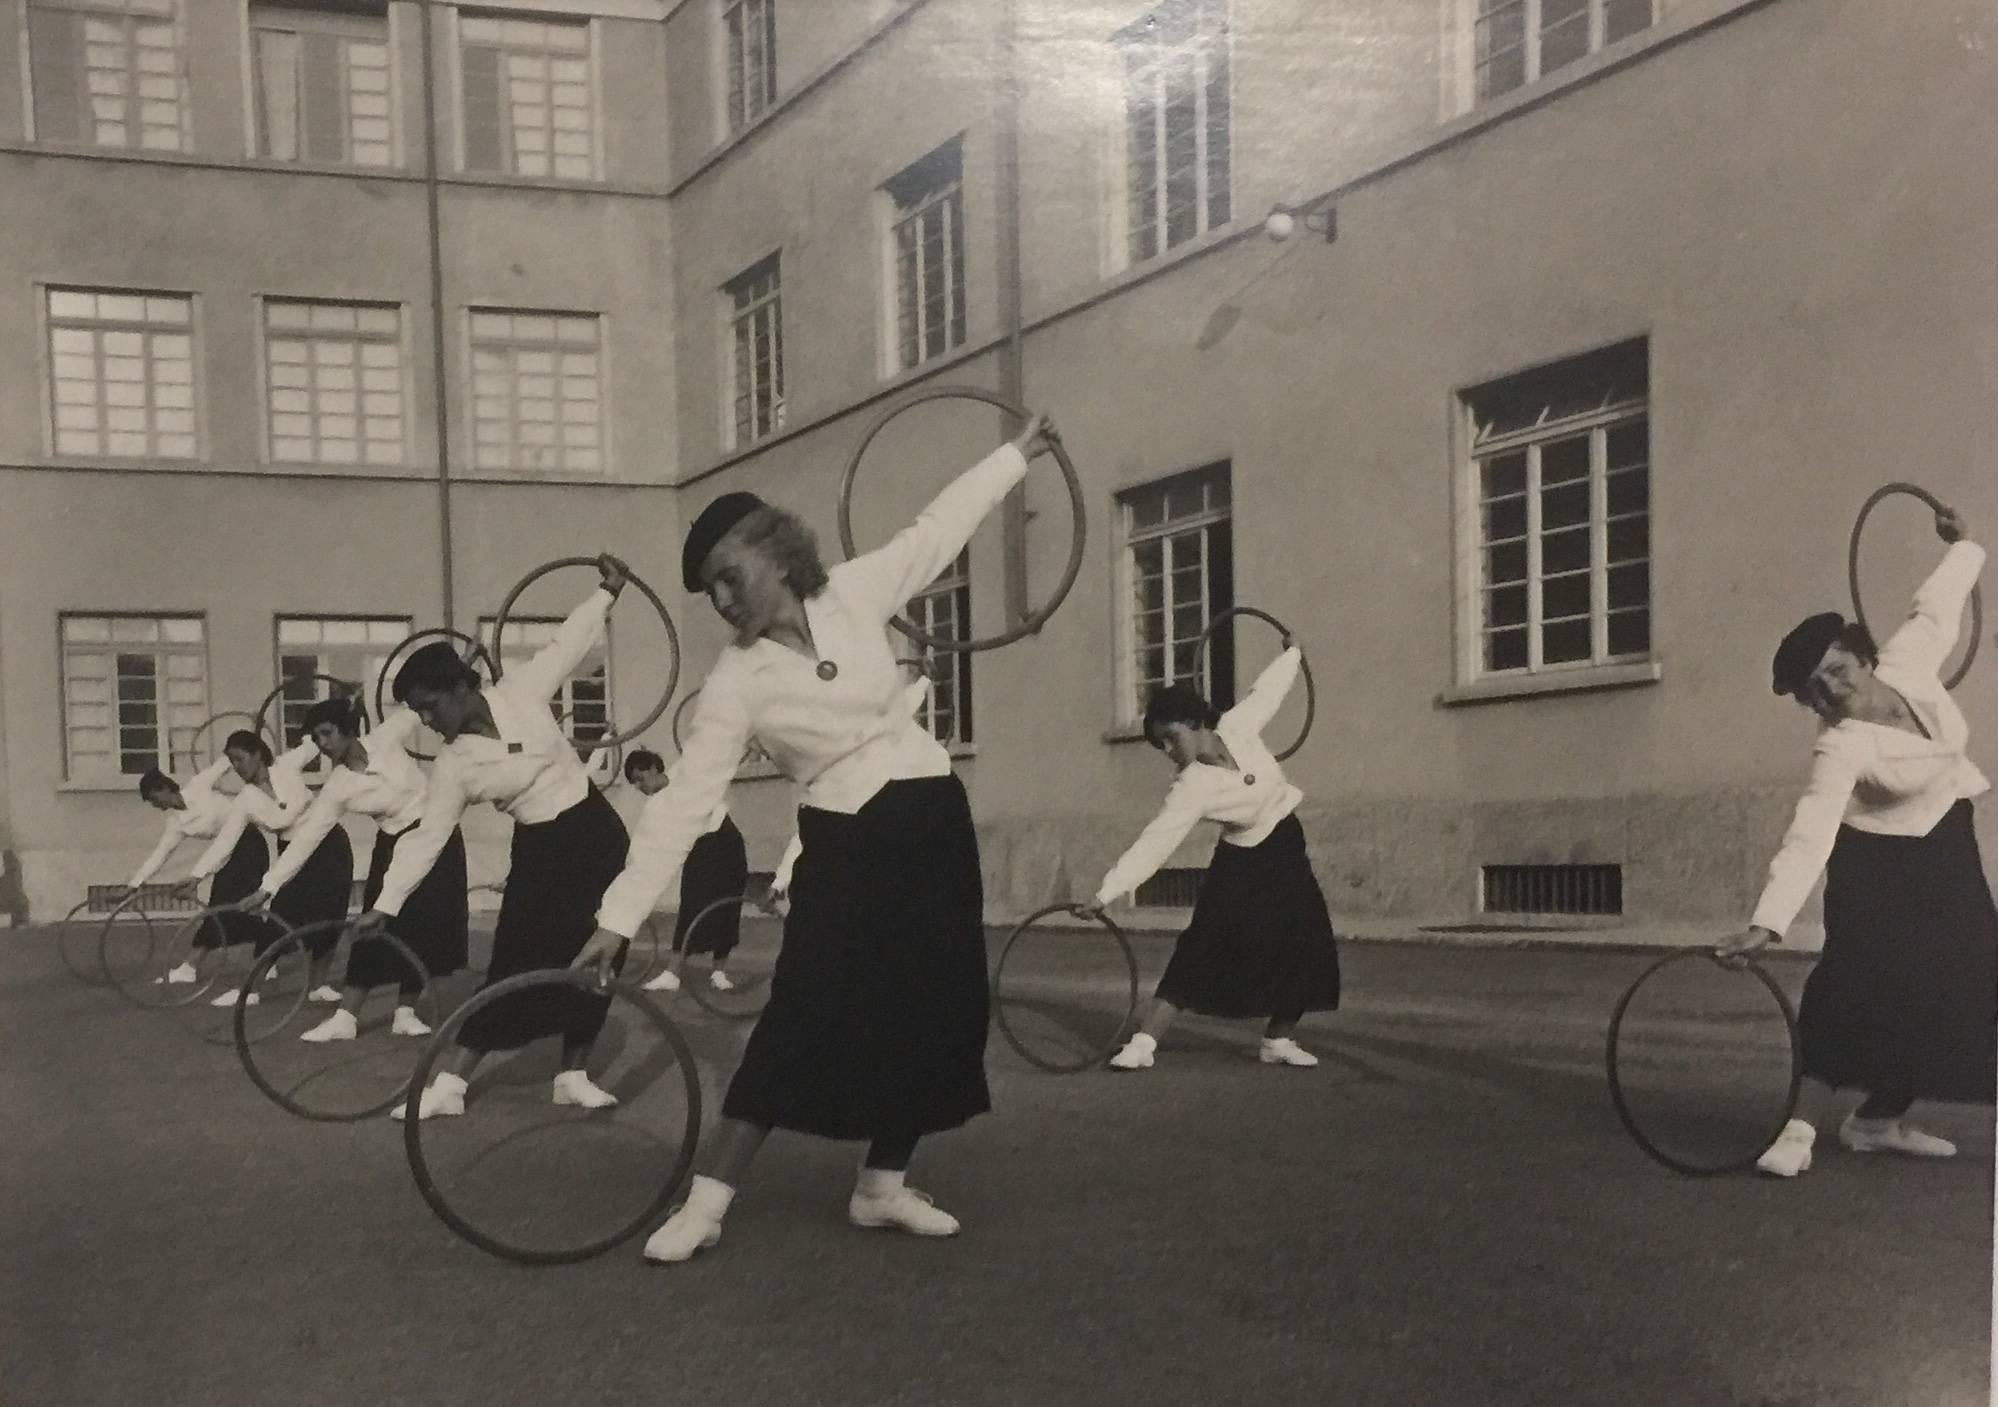 Unknown Portrait Photograph - Fascism - Female Exercises with wooden hoops